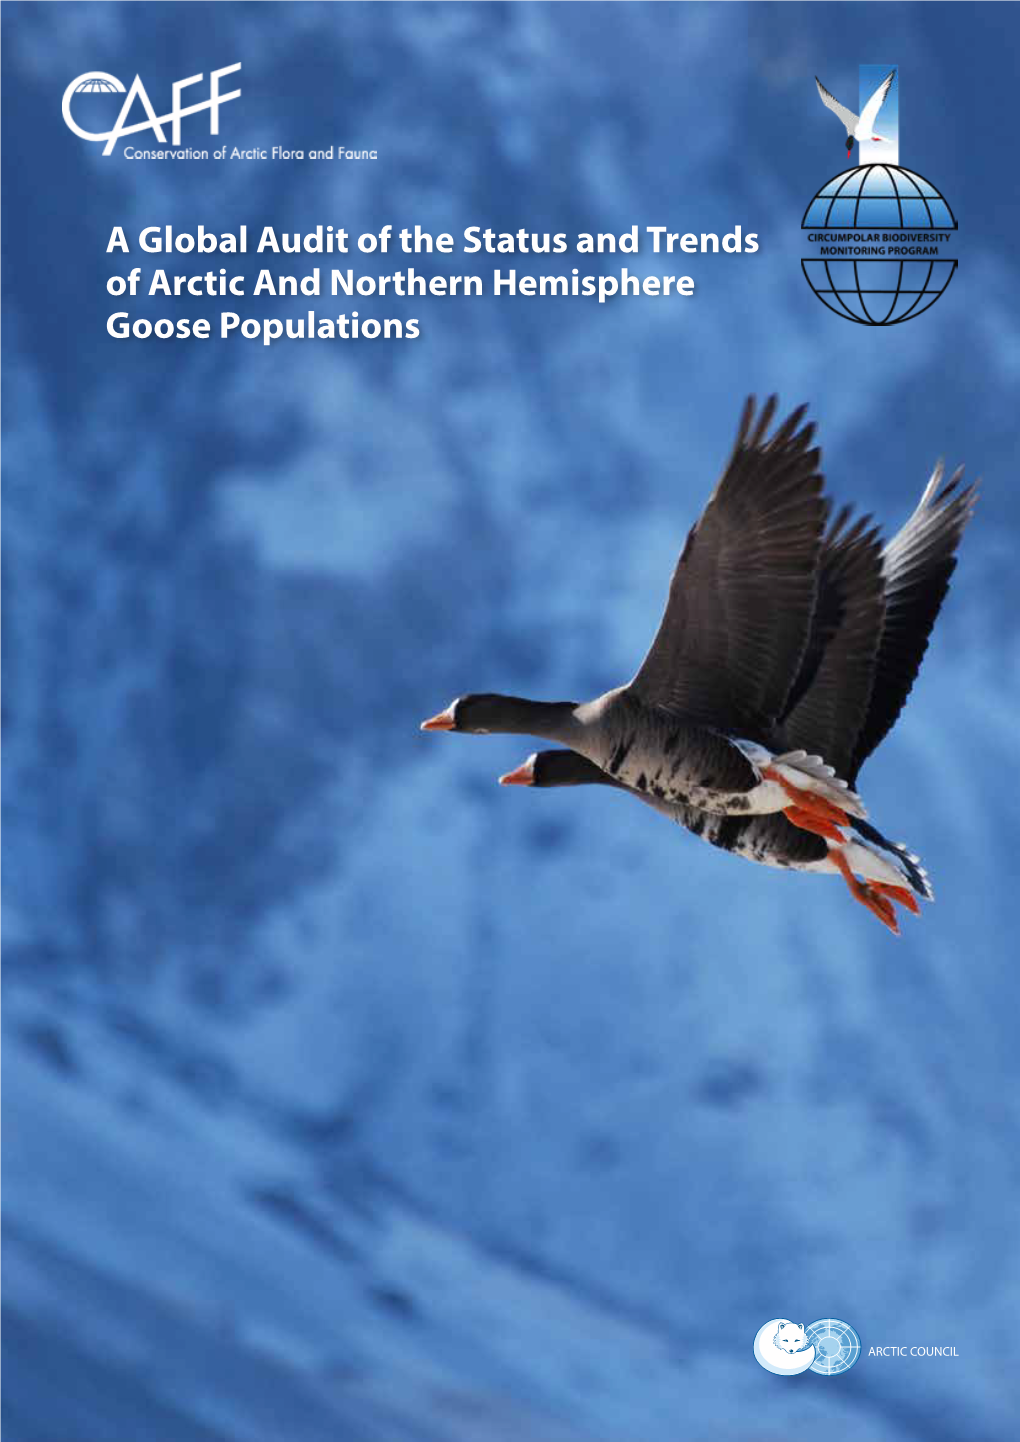 A Global Audit of the Status and Trends of Arctic and Northern Hemisphere Goose Populations